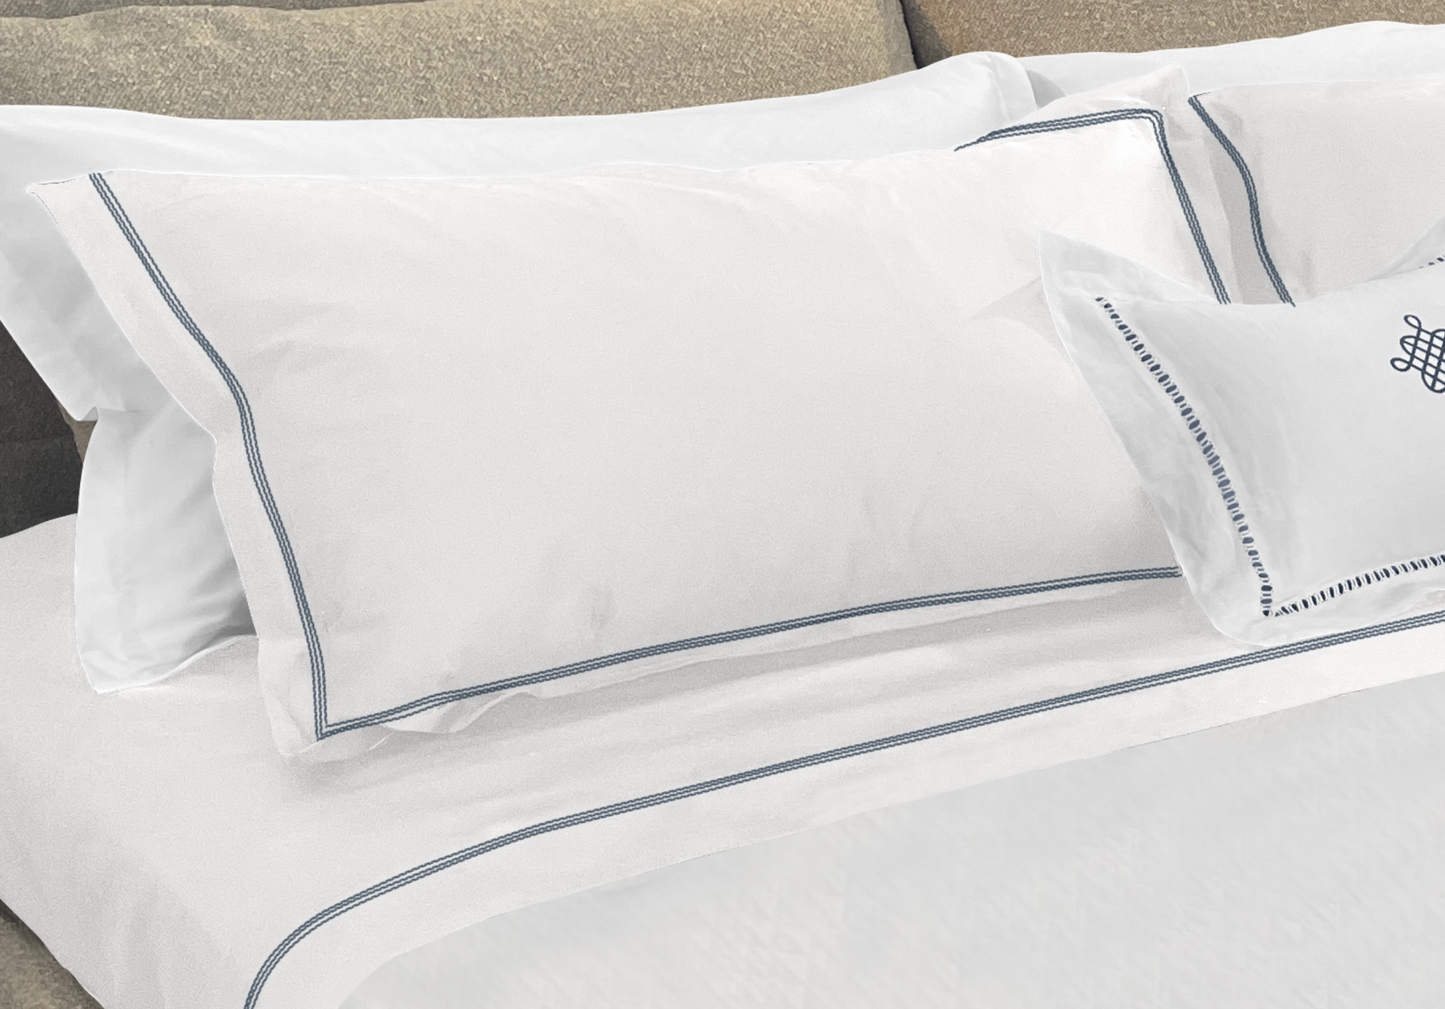 Narragansett White Pillow Sham with a triple contrasting stitch in Deep Sea. It is shown with our Daily Basics 300tc Egyptian Cotton Sateen Sleeping Sham in White. 